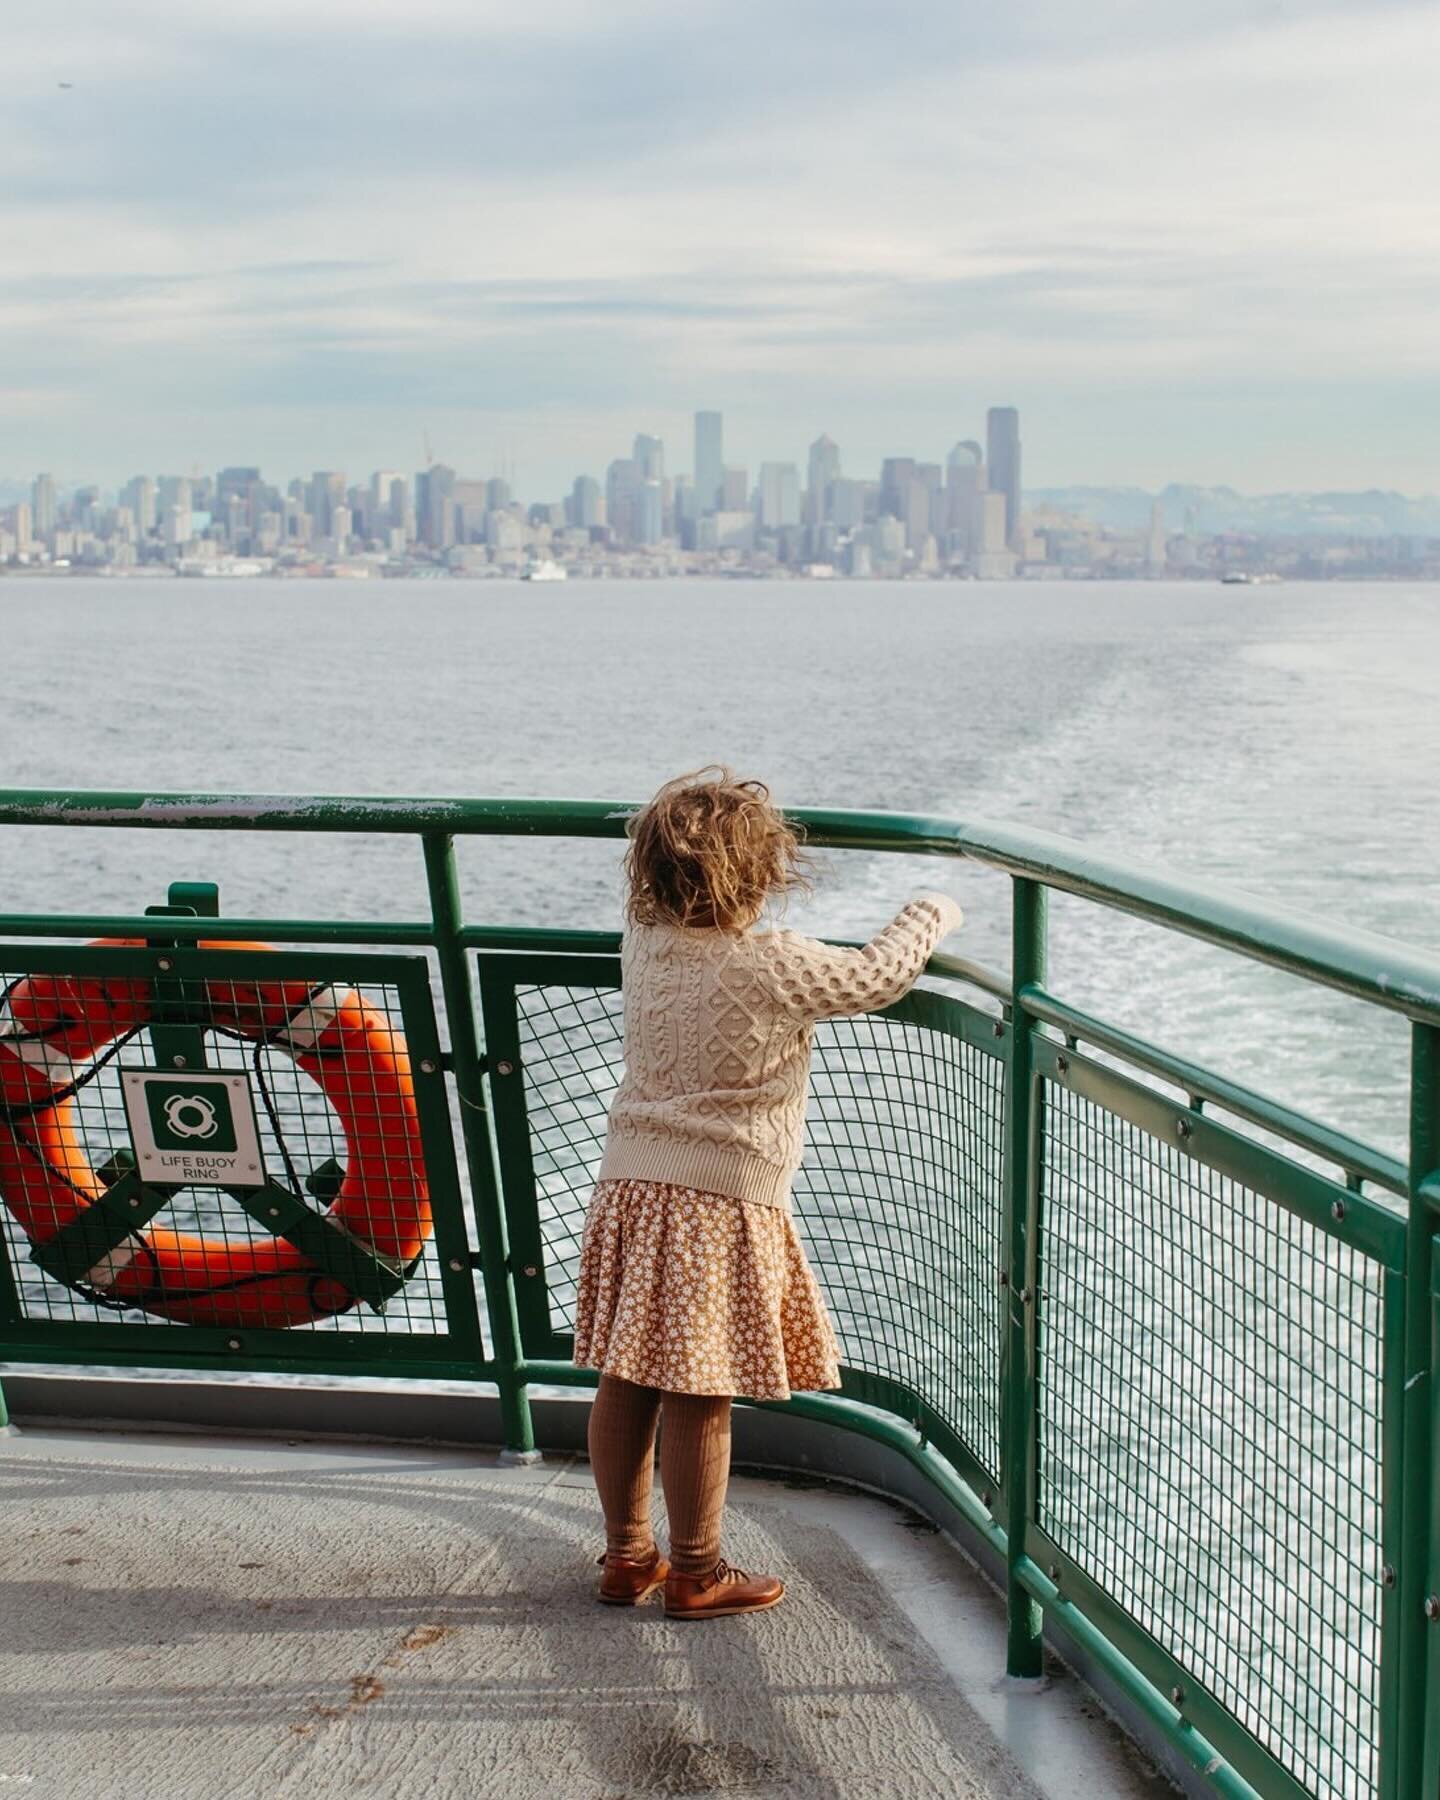 I&rsquo;ll always say yes to a session on a ferry boat! 

Growing up in Mukilteo, the ferry is a symbol of home that comforted me during the 6 years I spent away from the Puget Sound and it salty, crisp air. 

This session last fall was such a specia